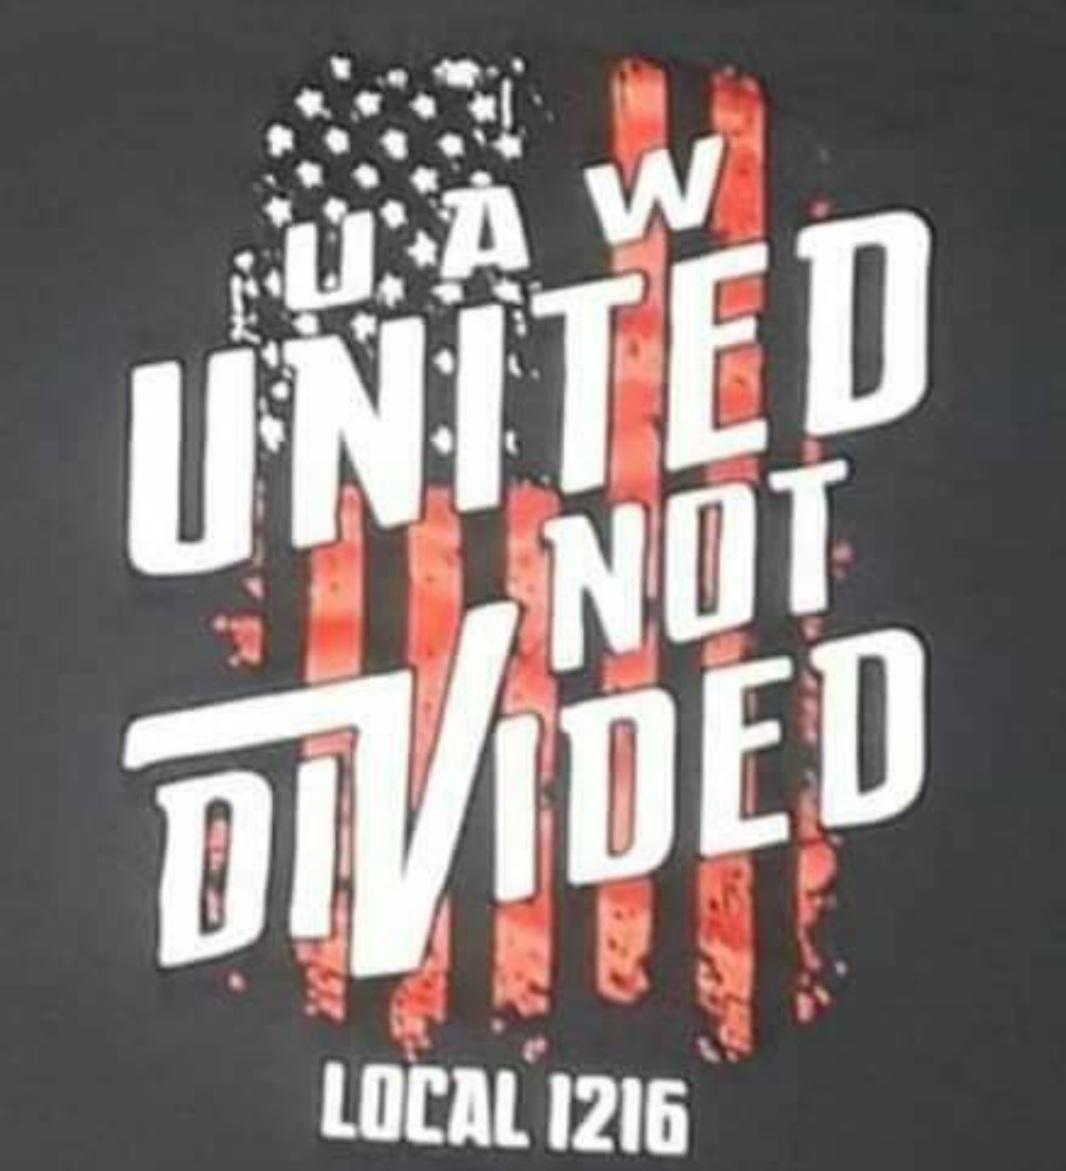 United Not Divided